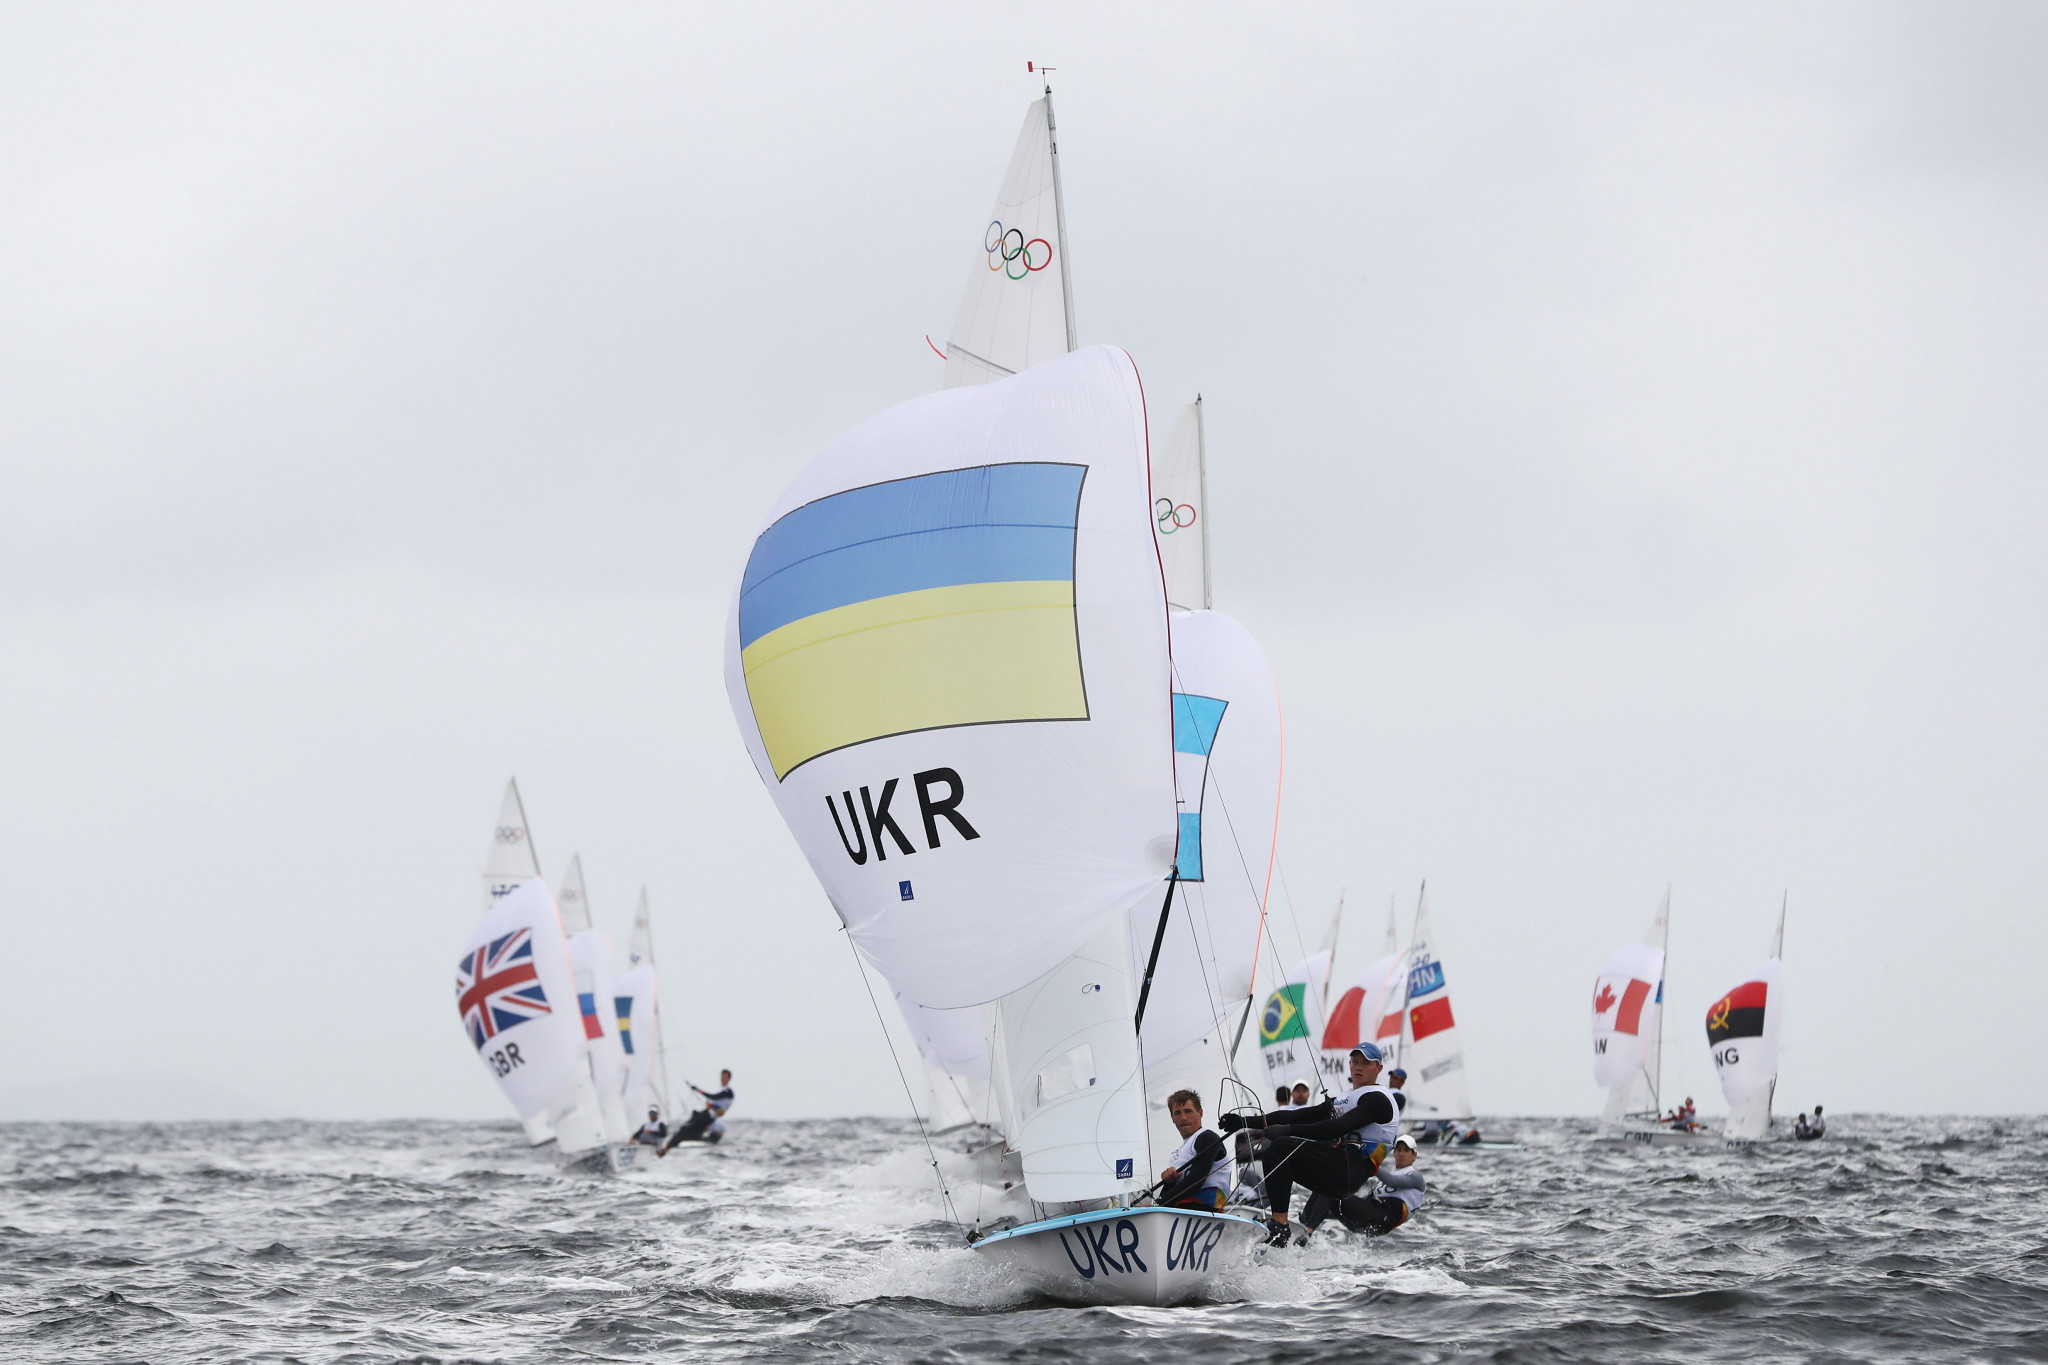 The Ukraine Sailing Federation have called on World Sailing to ban Russia, amid tensions over the Crimean Peninsula ©Getty Images